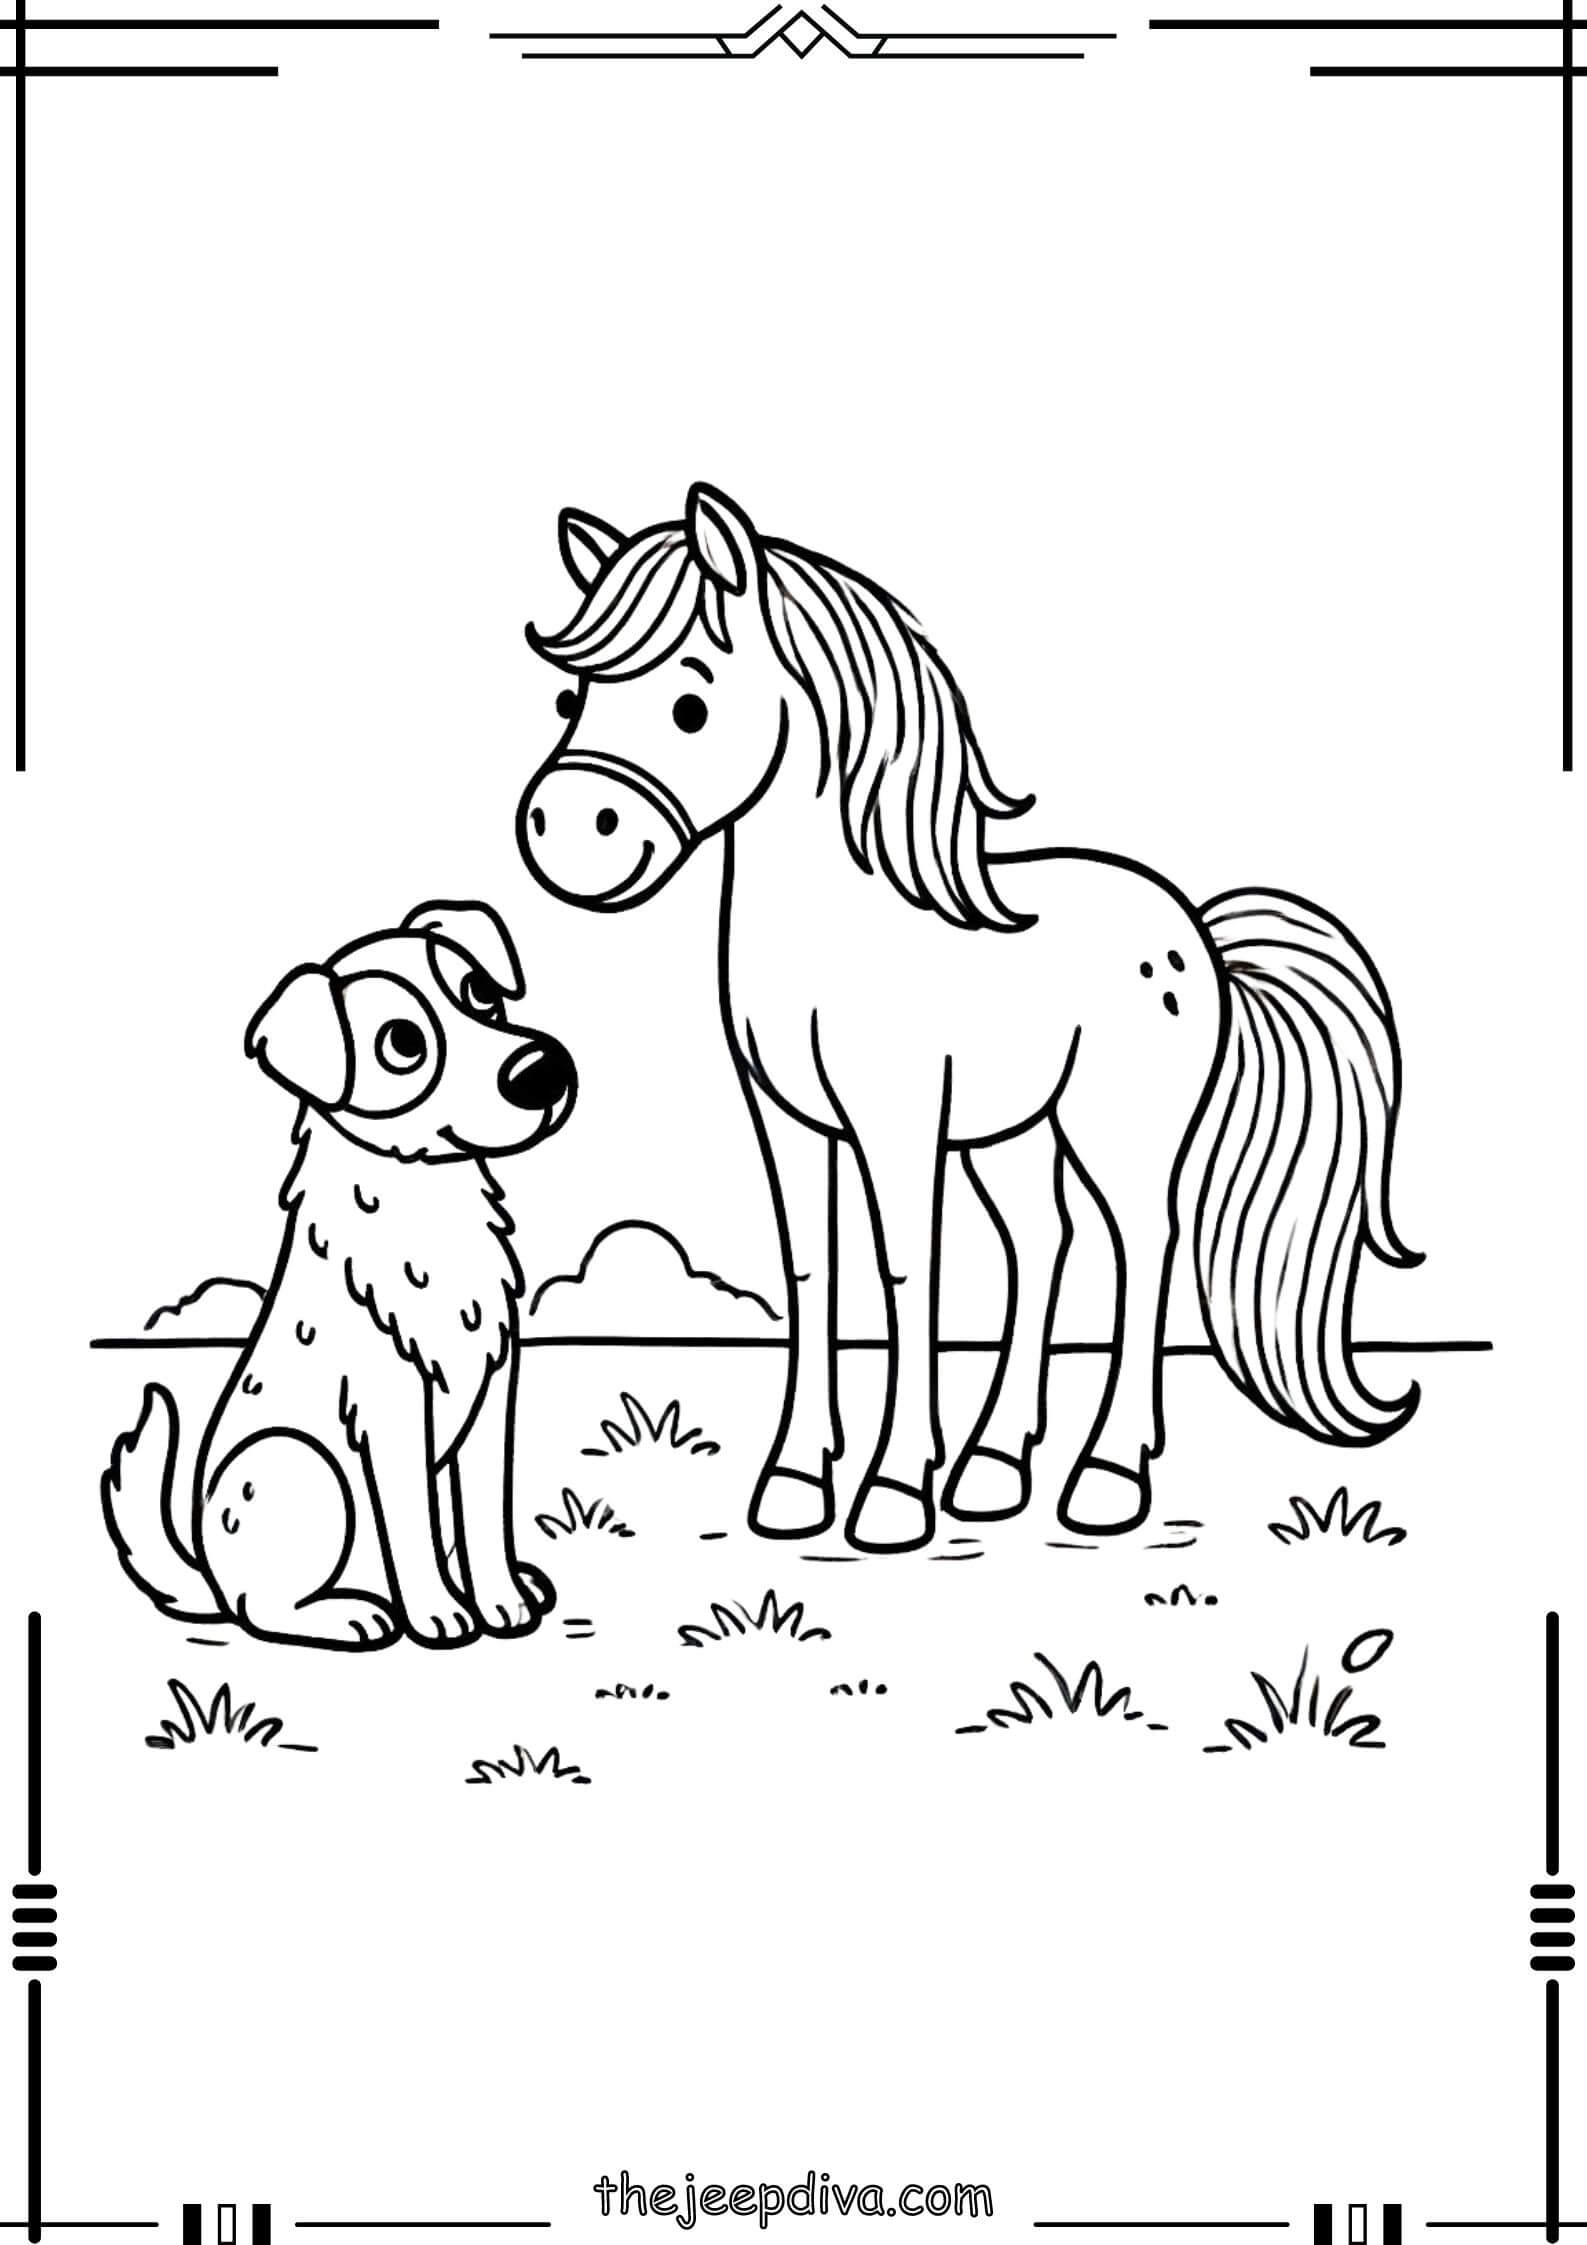 Horse-Colouring-Pages-Medium-2